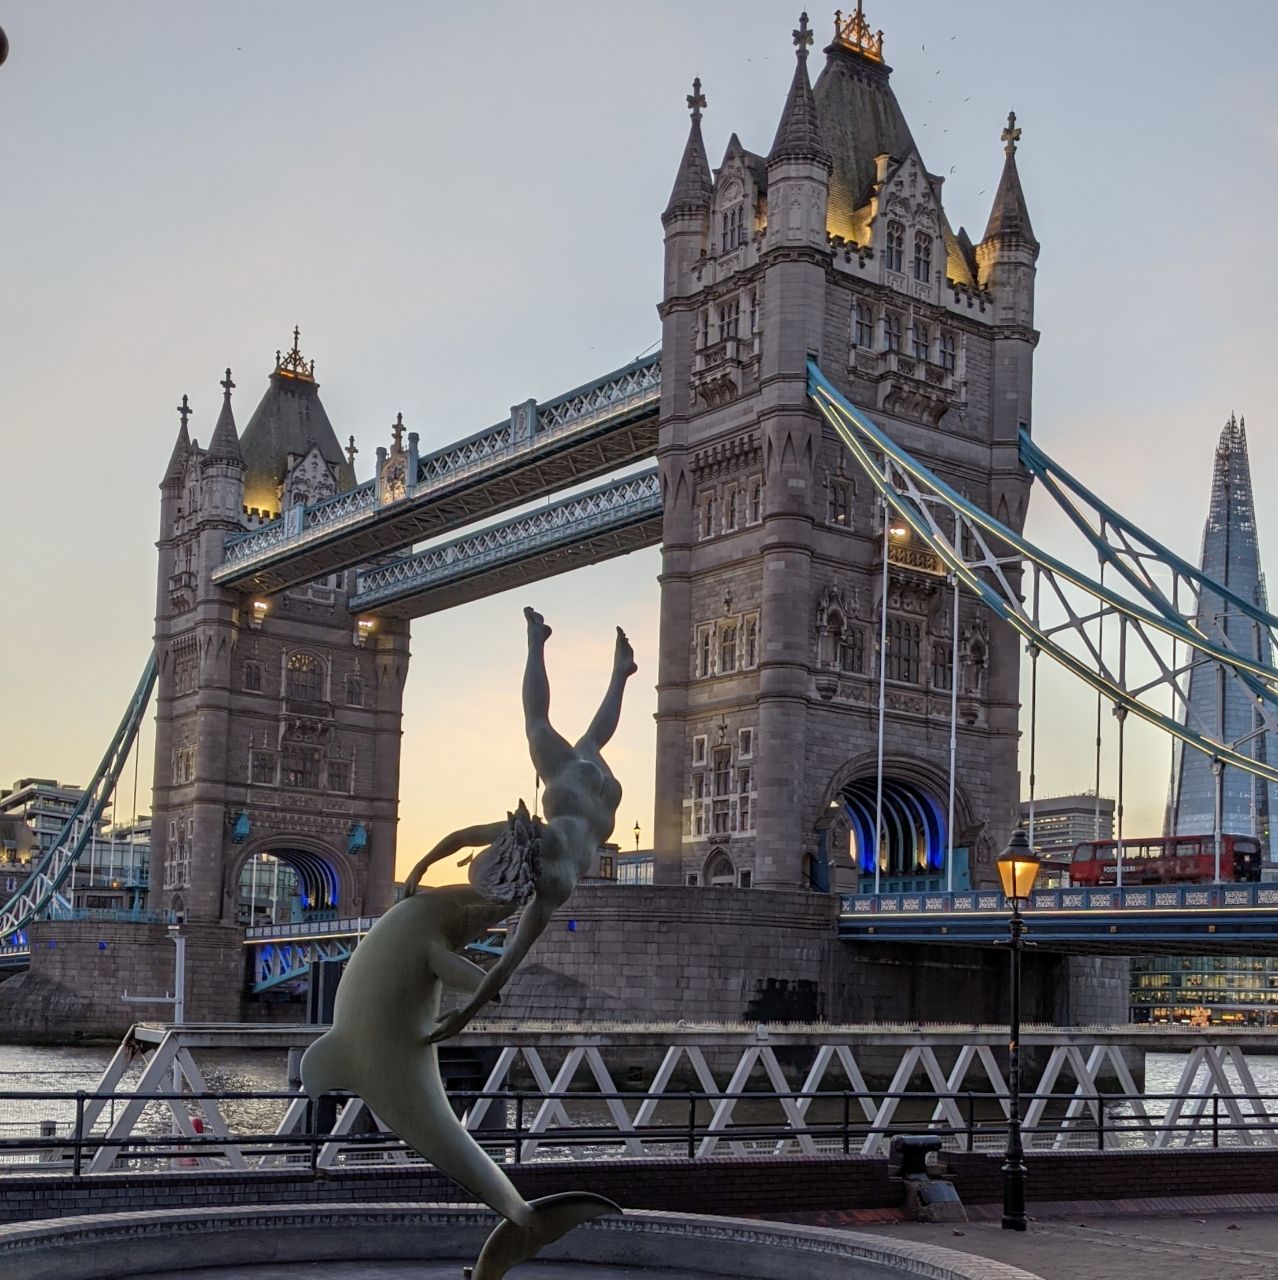 Tower bridge - From Girl with the dolphin, United Kingdom